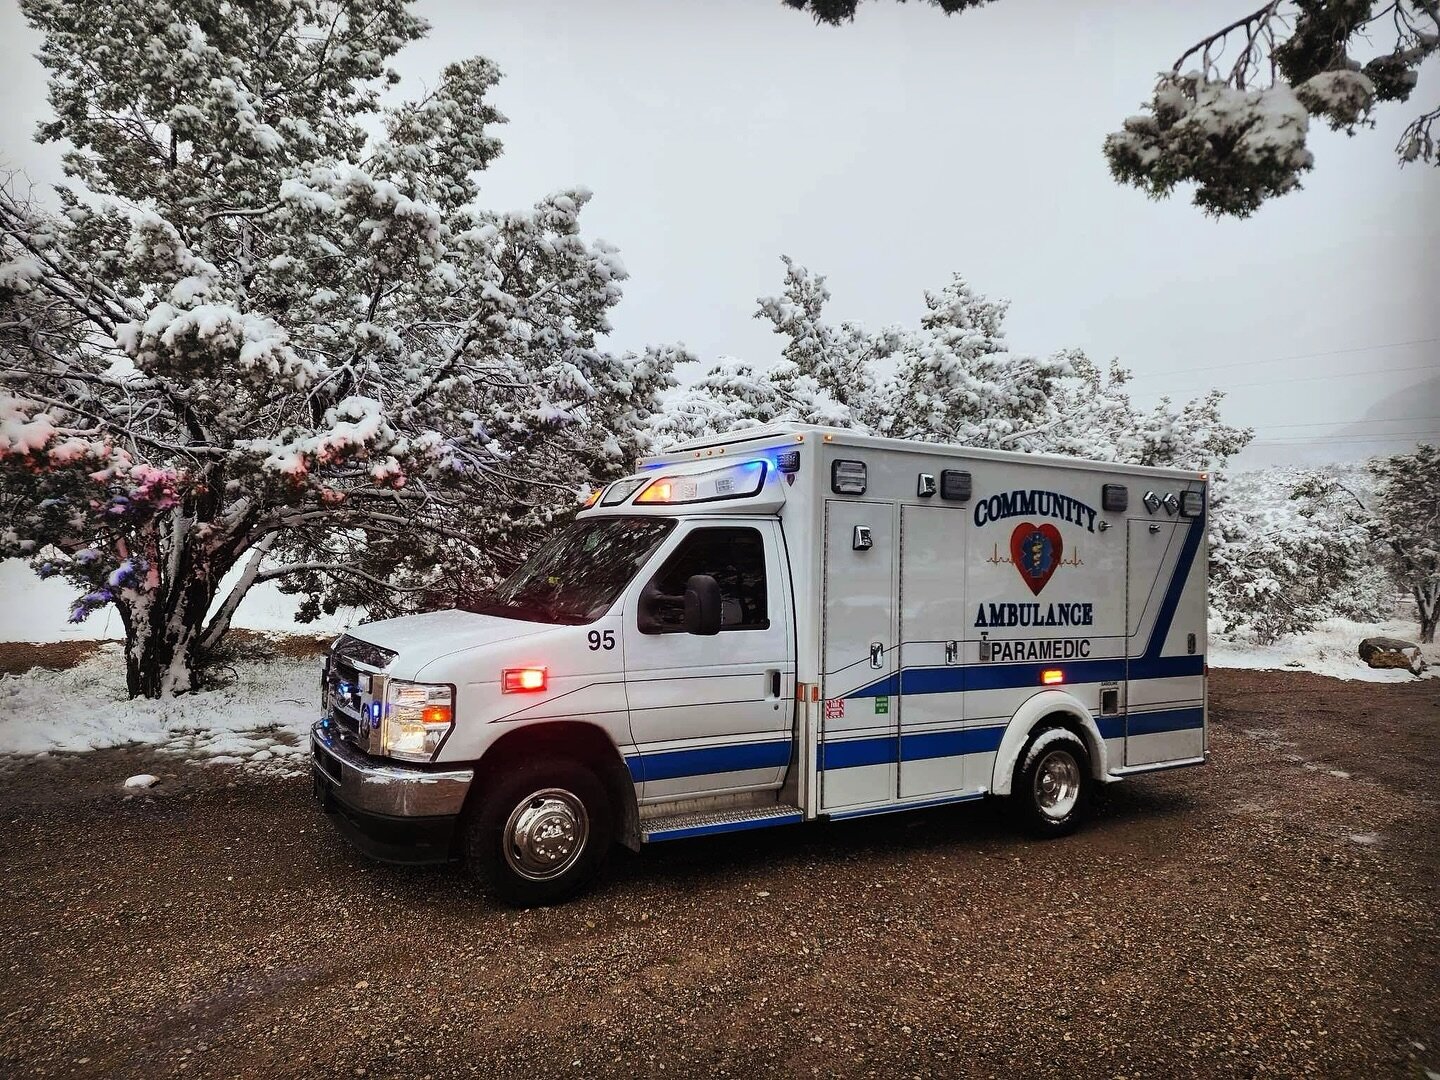 Unexpectedly chilly spring day here in Southern Nevada! Our employees captured this photo earlier this week of one of our ambulances amidst a snowy landscape. 

📸: Paramedic T. Serticchio
.
.
.
#ambulance #spring #snow #paramedic #ems #emergency #co